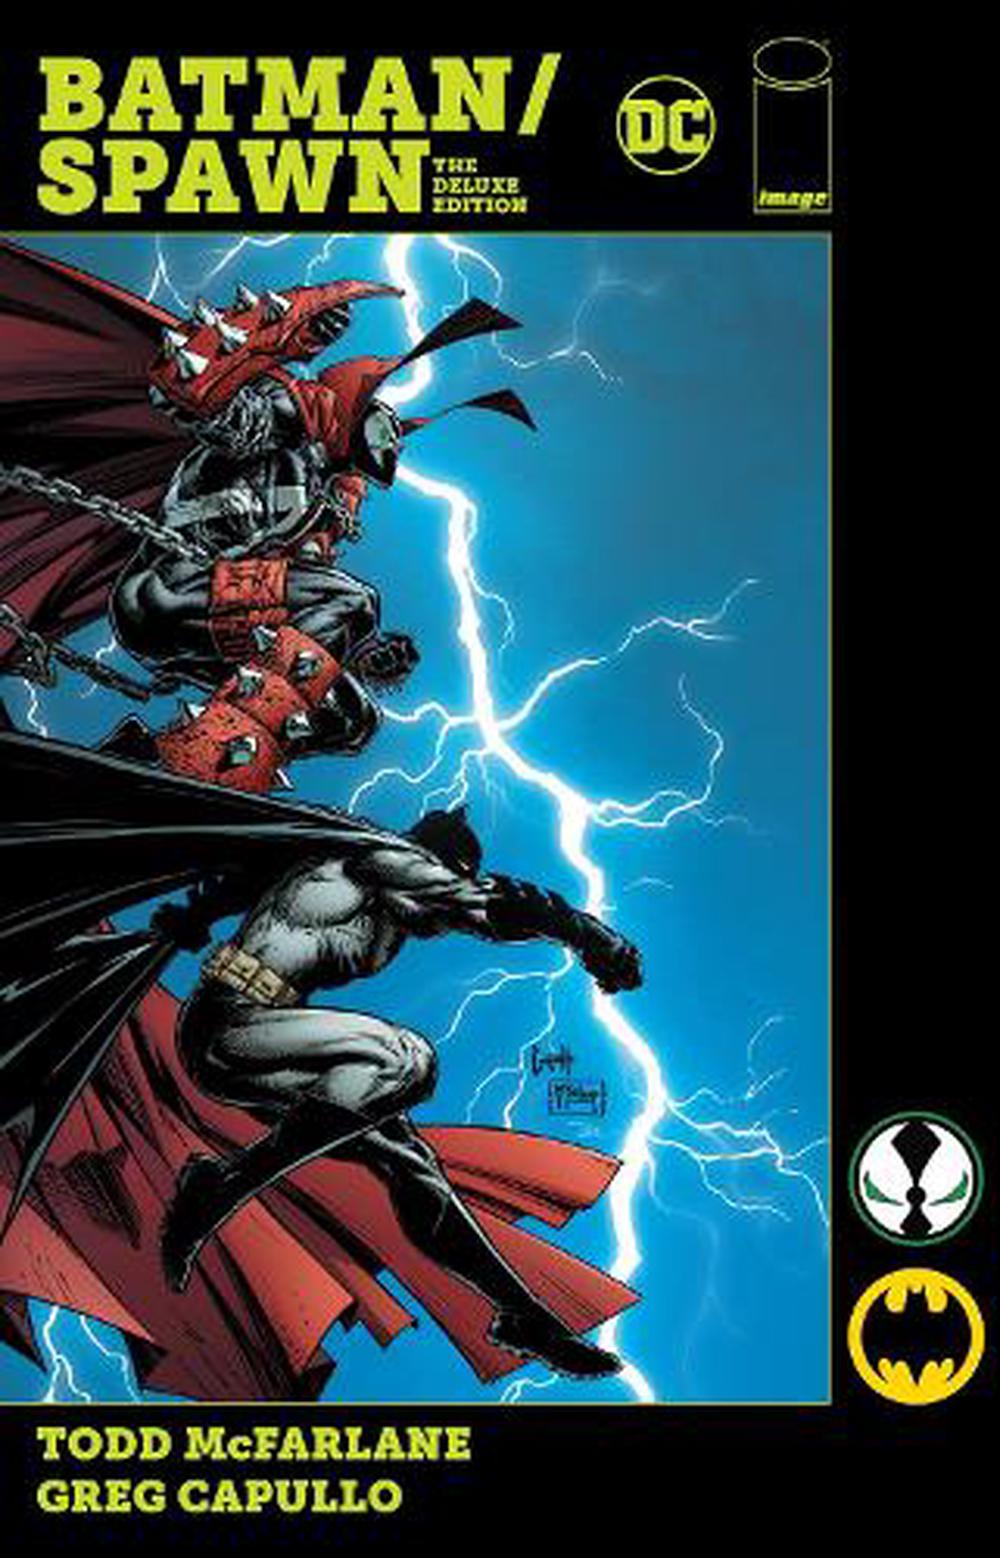 Moby　9781779522818　Great　McFarlane,　Hardcover,　Deluxe　Batman/Spawn:　by　Edition　The　online　at　Todd　Buy　the